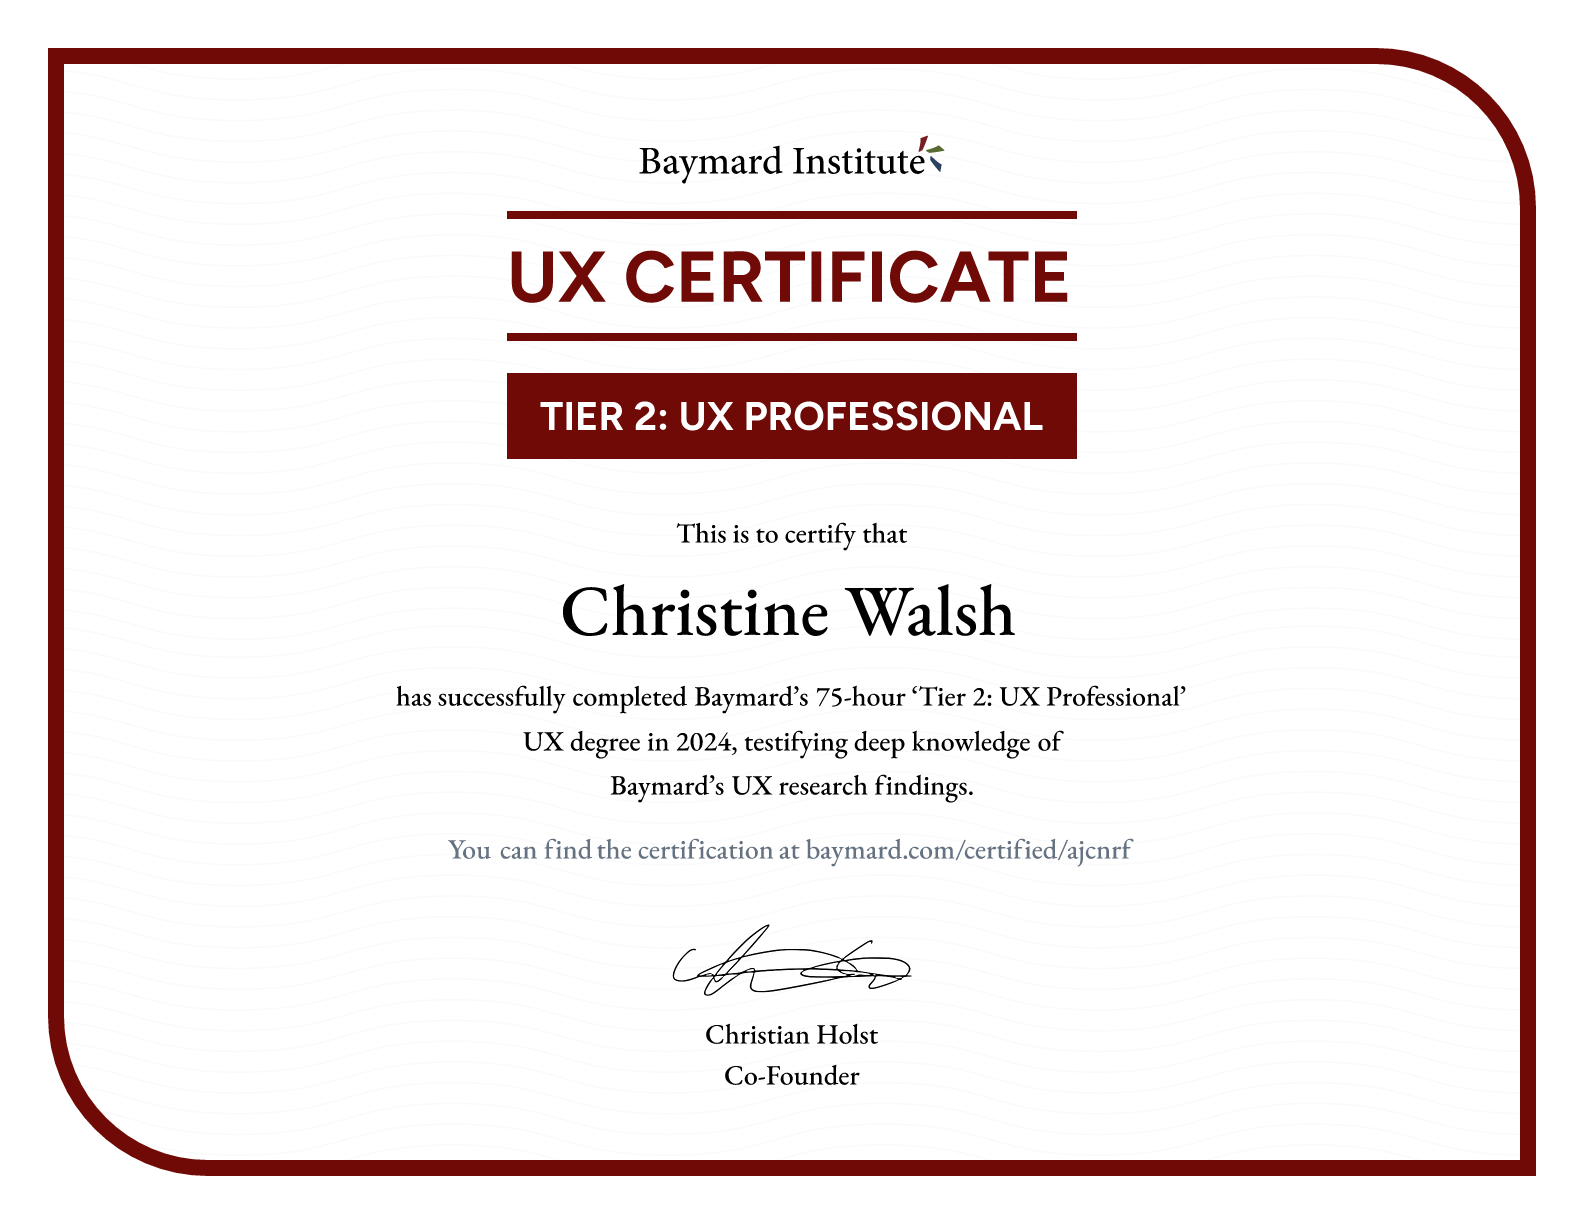 Christine Walsh’s certificate